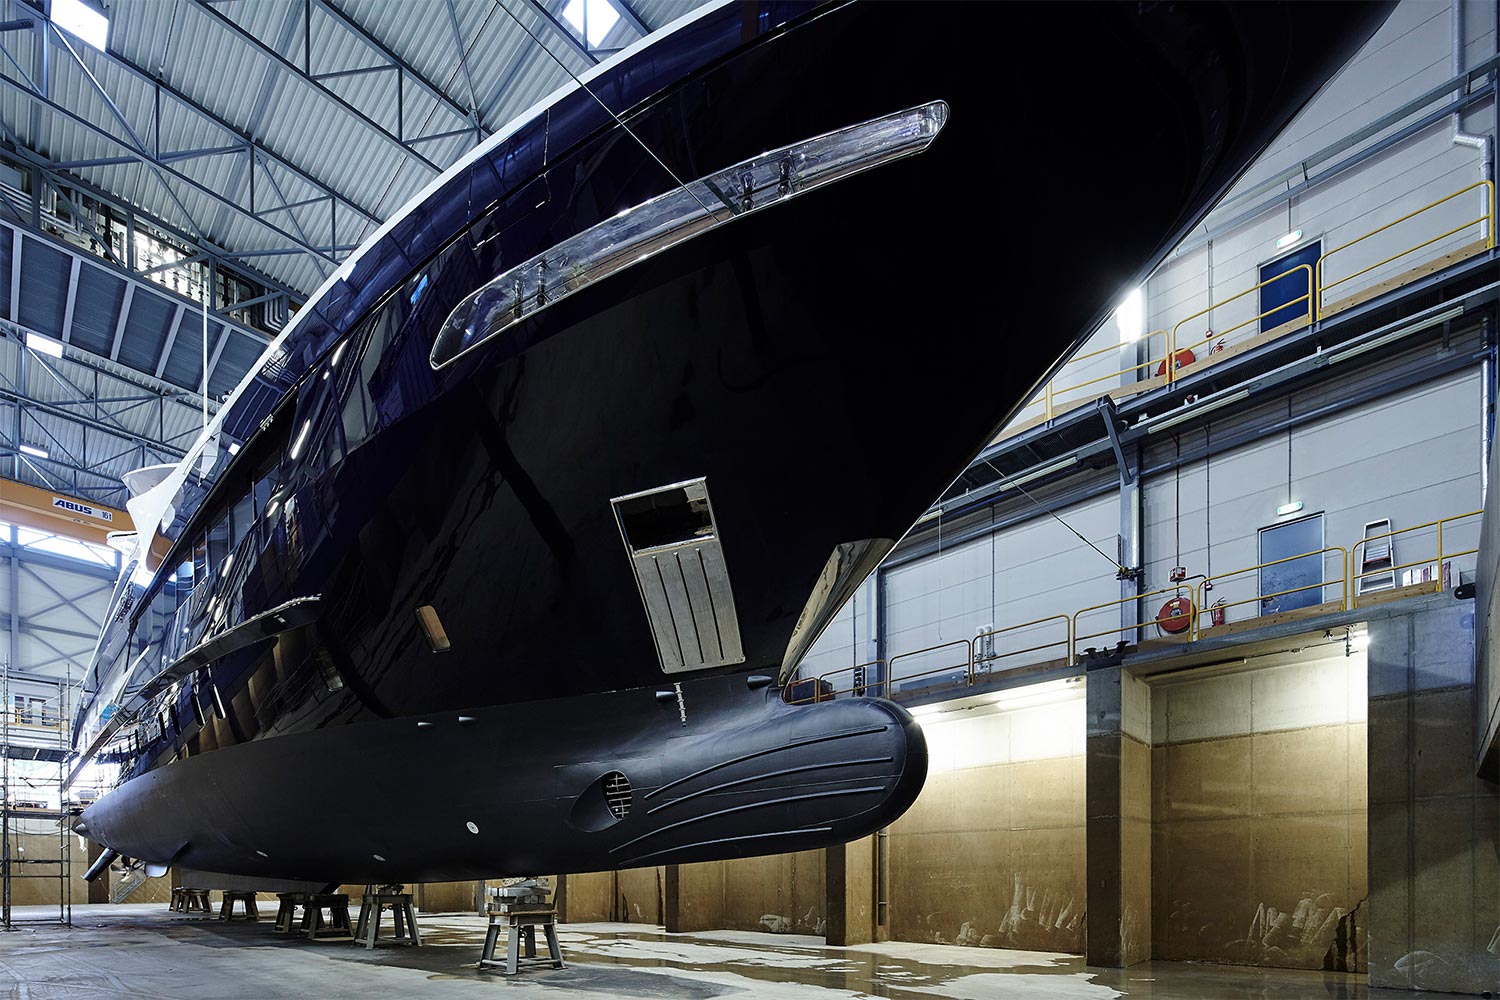 A Heesen superyacht being built at the Dutch company's shipyard in the Netherlands